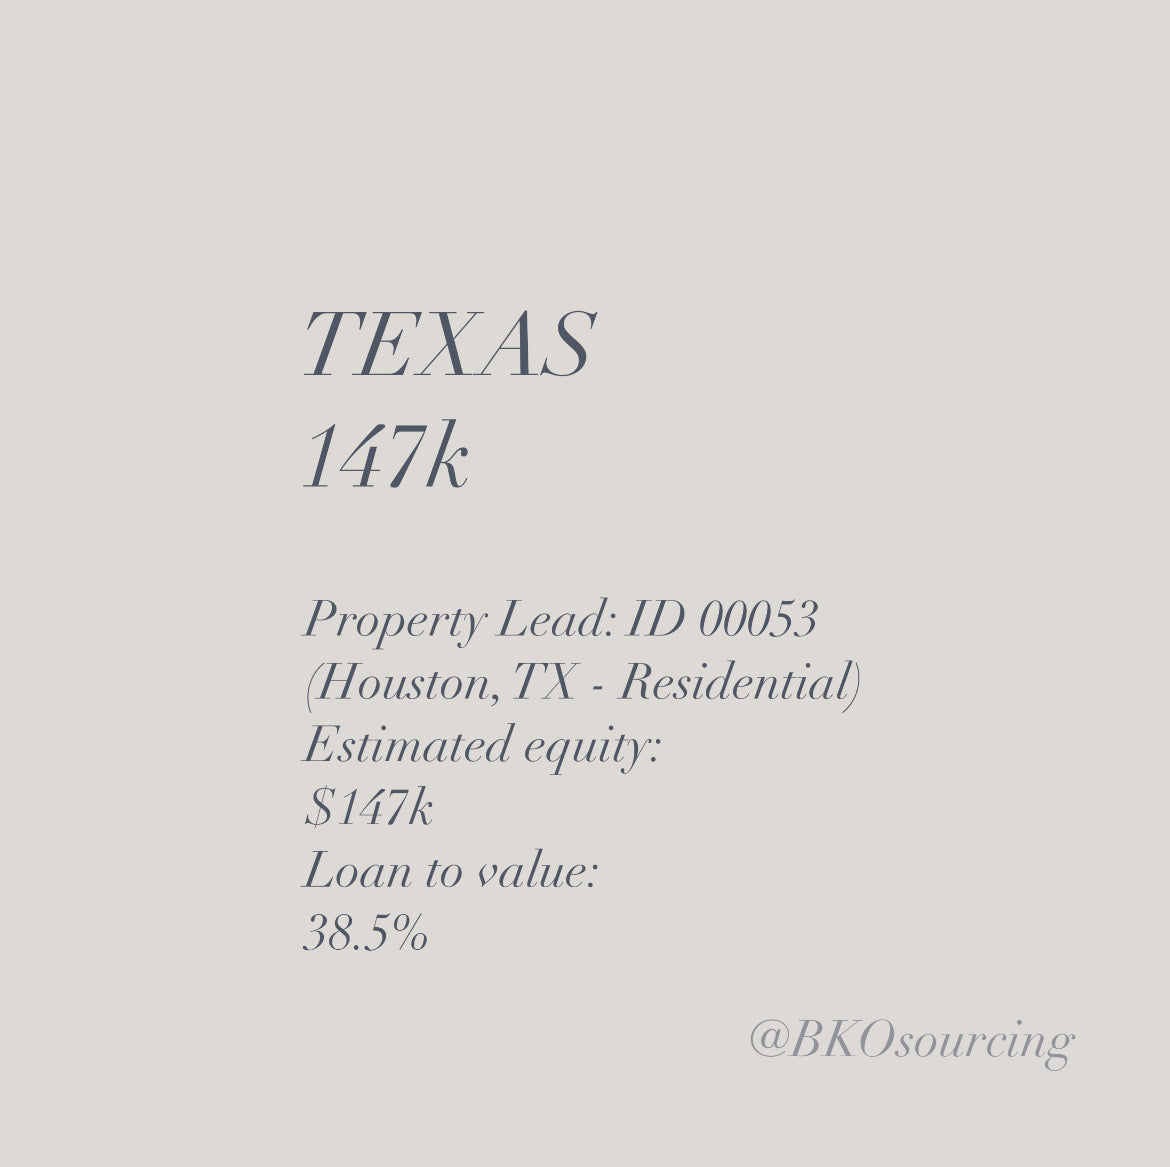 Property Lead 00053 - Texas - Houston - 147k - 38.5% - 2023-23OCT - with comparables